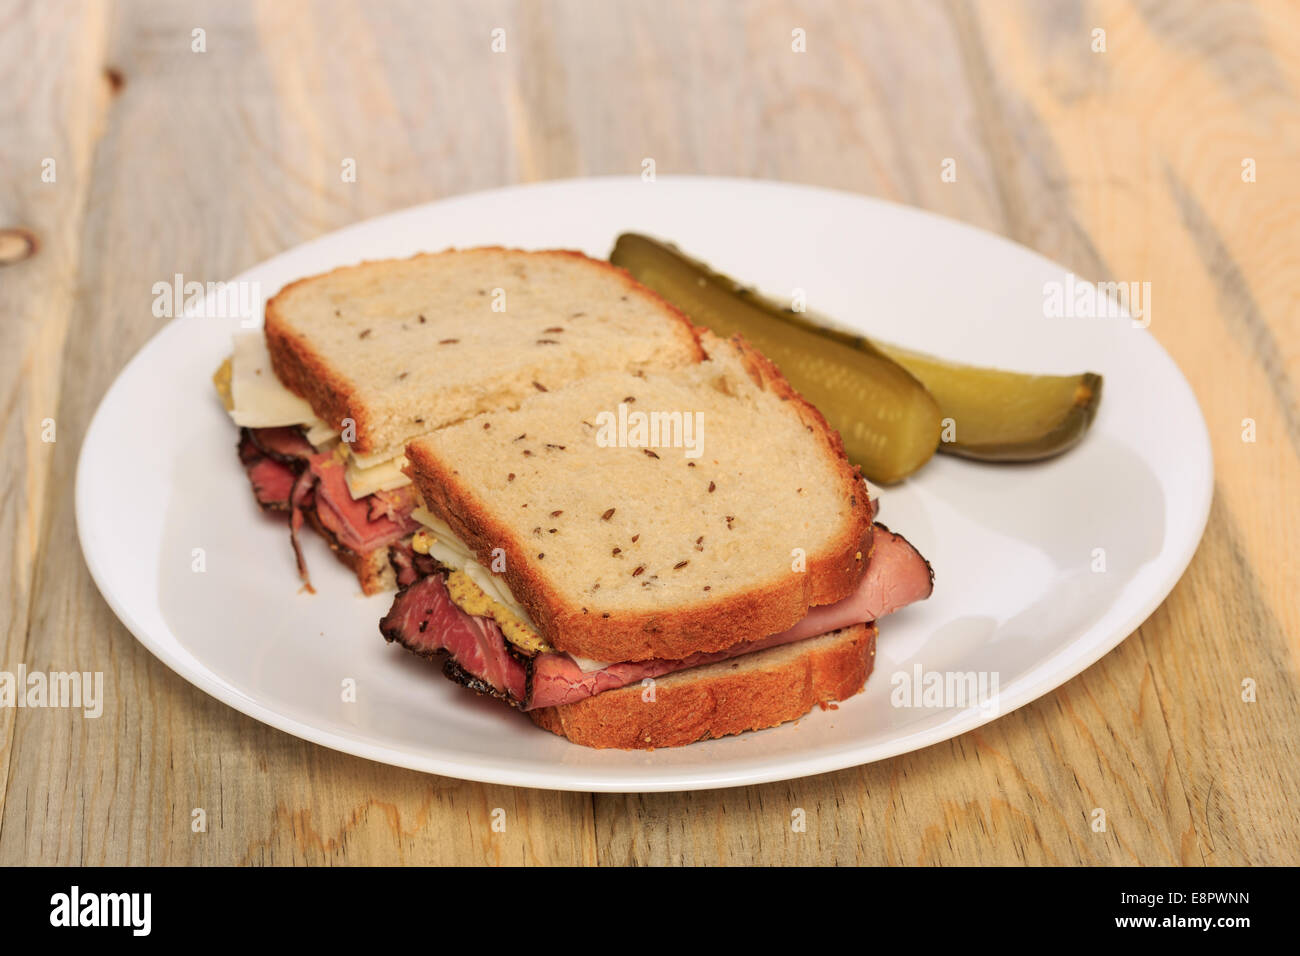 Pastrami sandwich on Jewish Rye bread with swiss cheese, mustard, and kosher dill pickles Stock Photo